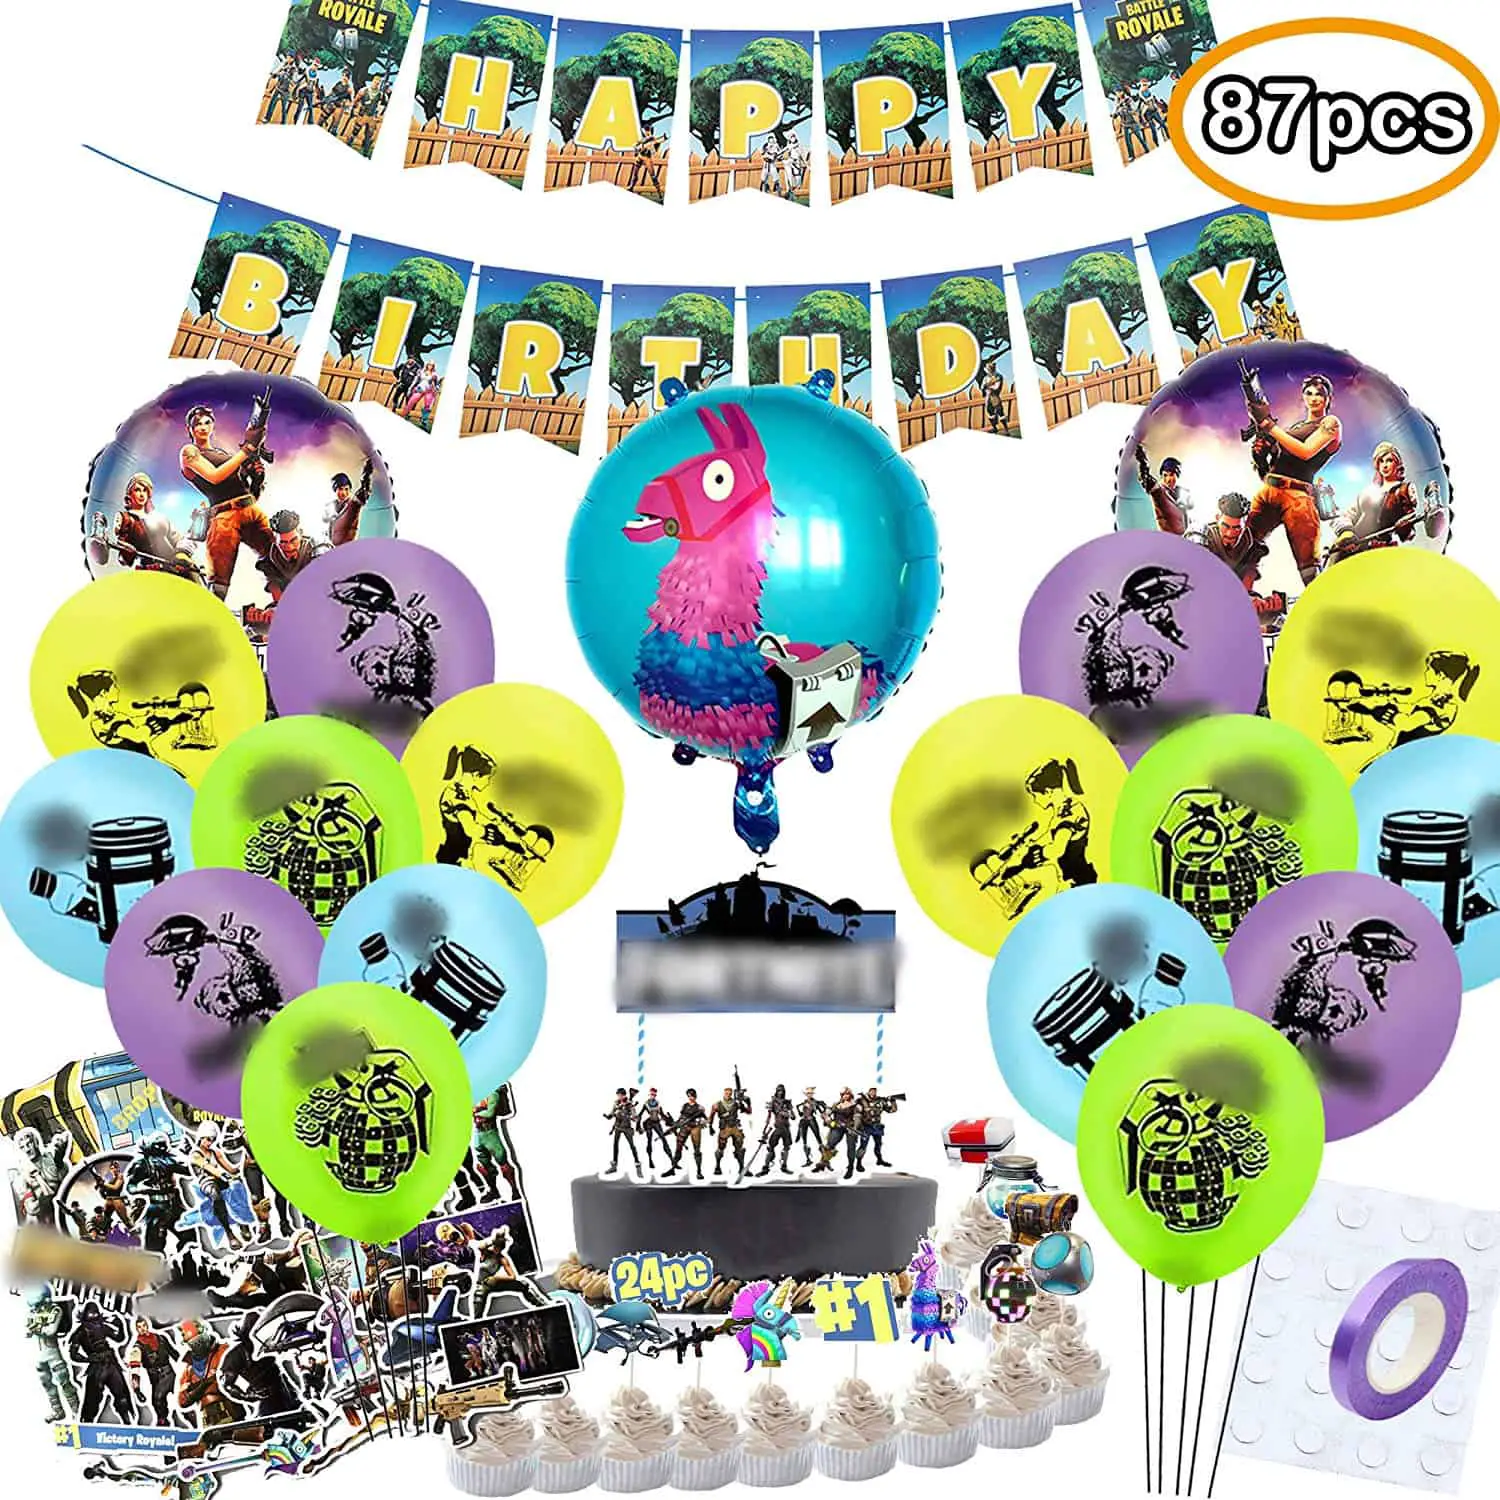 TOYOYO Video Game Party Supplies for Birthday Party